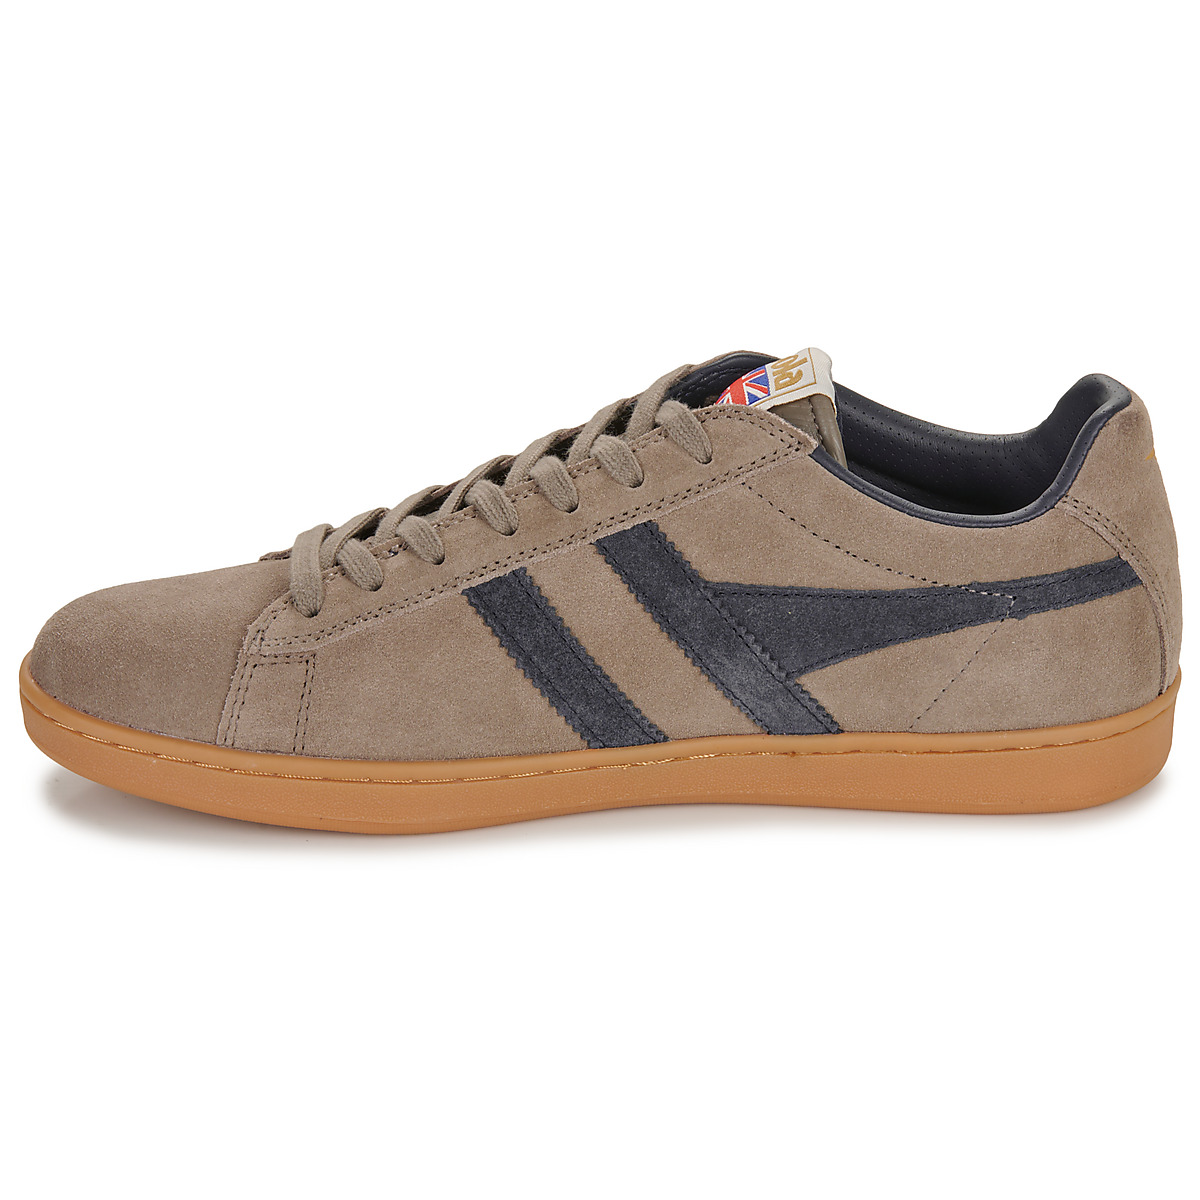 Gola Taupe / Noir EQUIPE SUEDE UiLcntWr